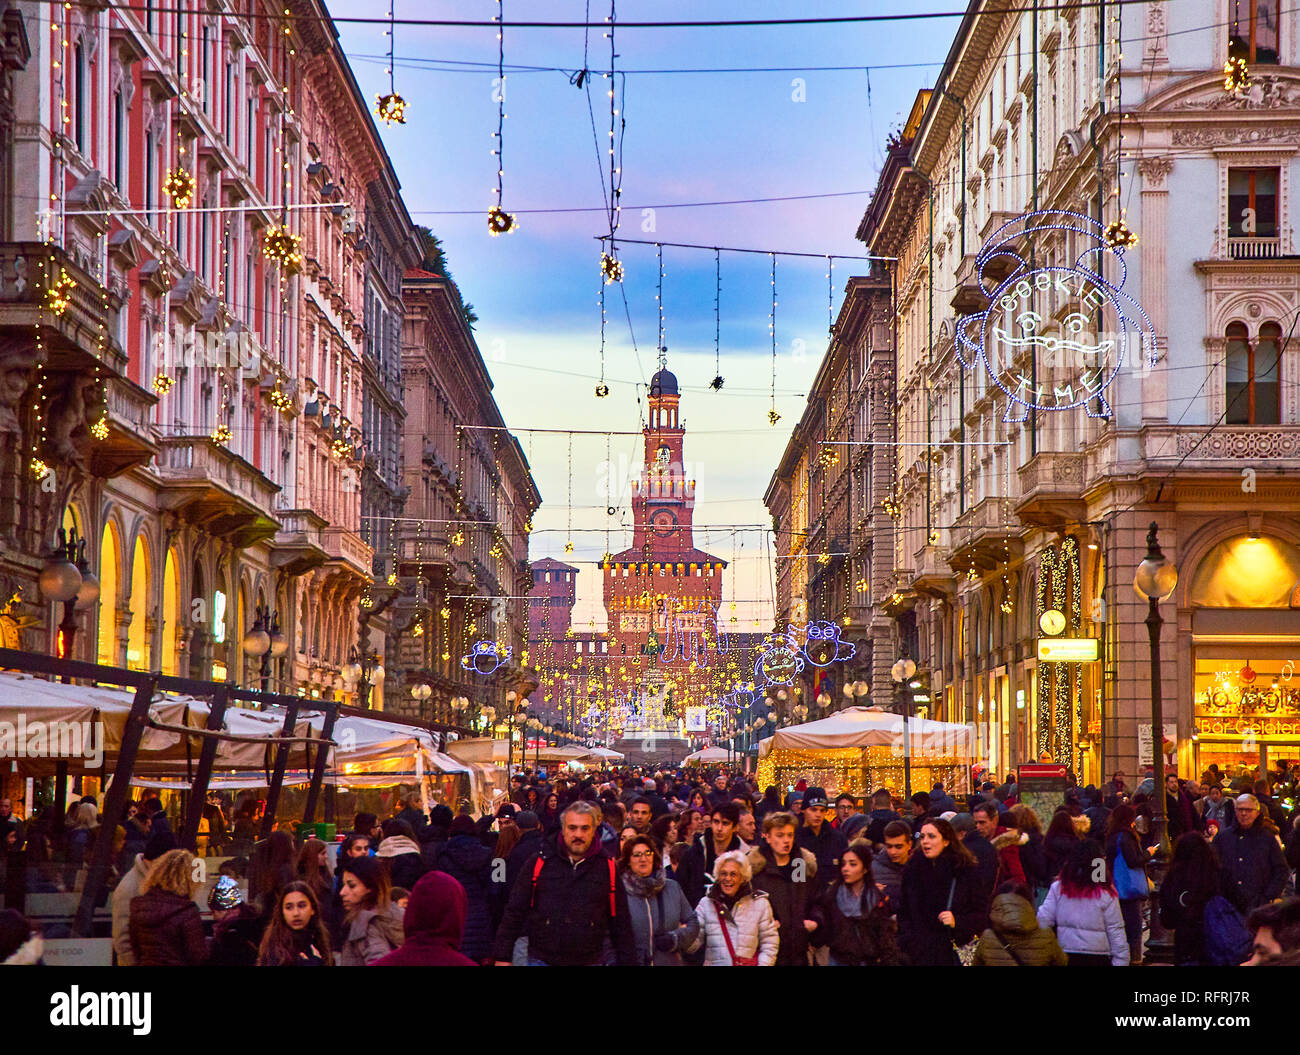 People walking on Via Dante street illuminated by christmas lights at nightfall with the Filarete Tower of the Castello Sforzesco in background. Milan Stock Photo